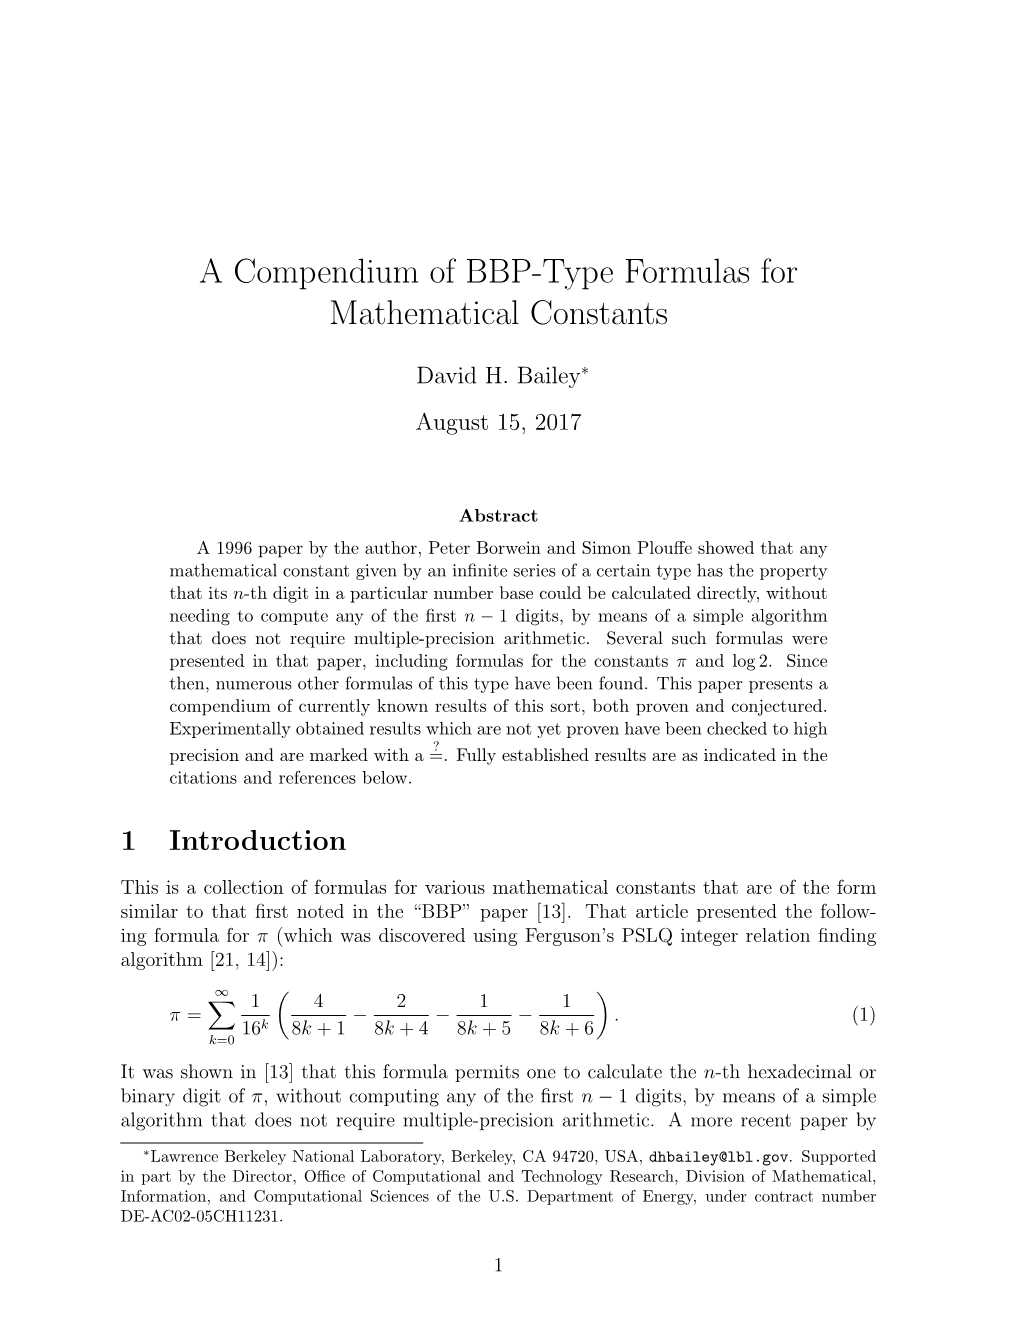 A Compendium of BBP-Type Formulas for Mathematical Constants